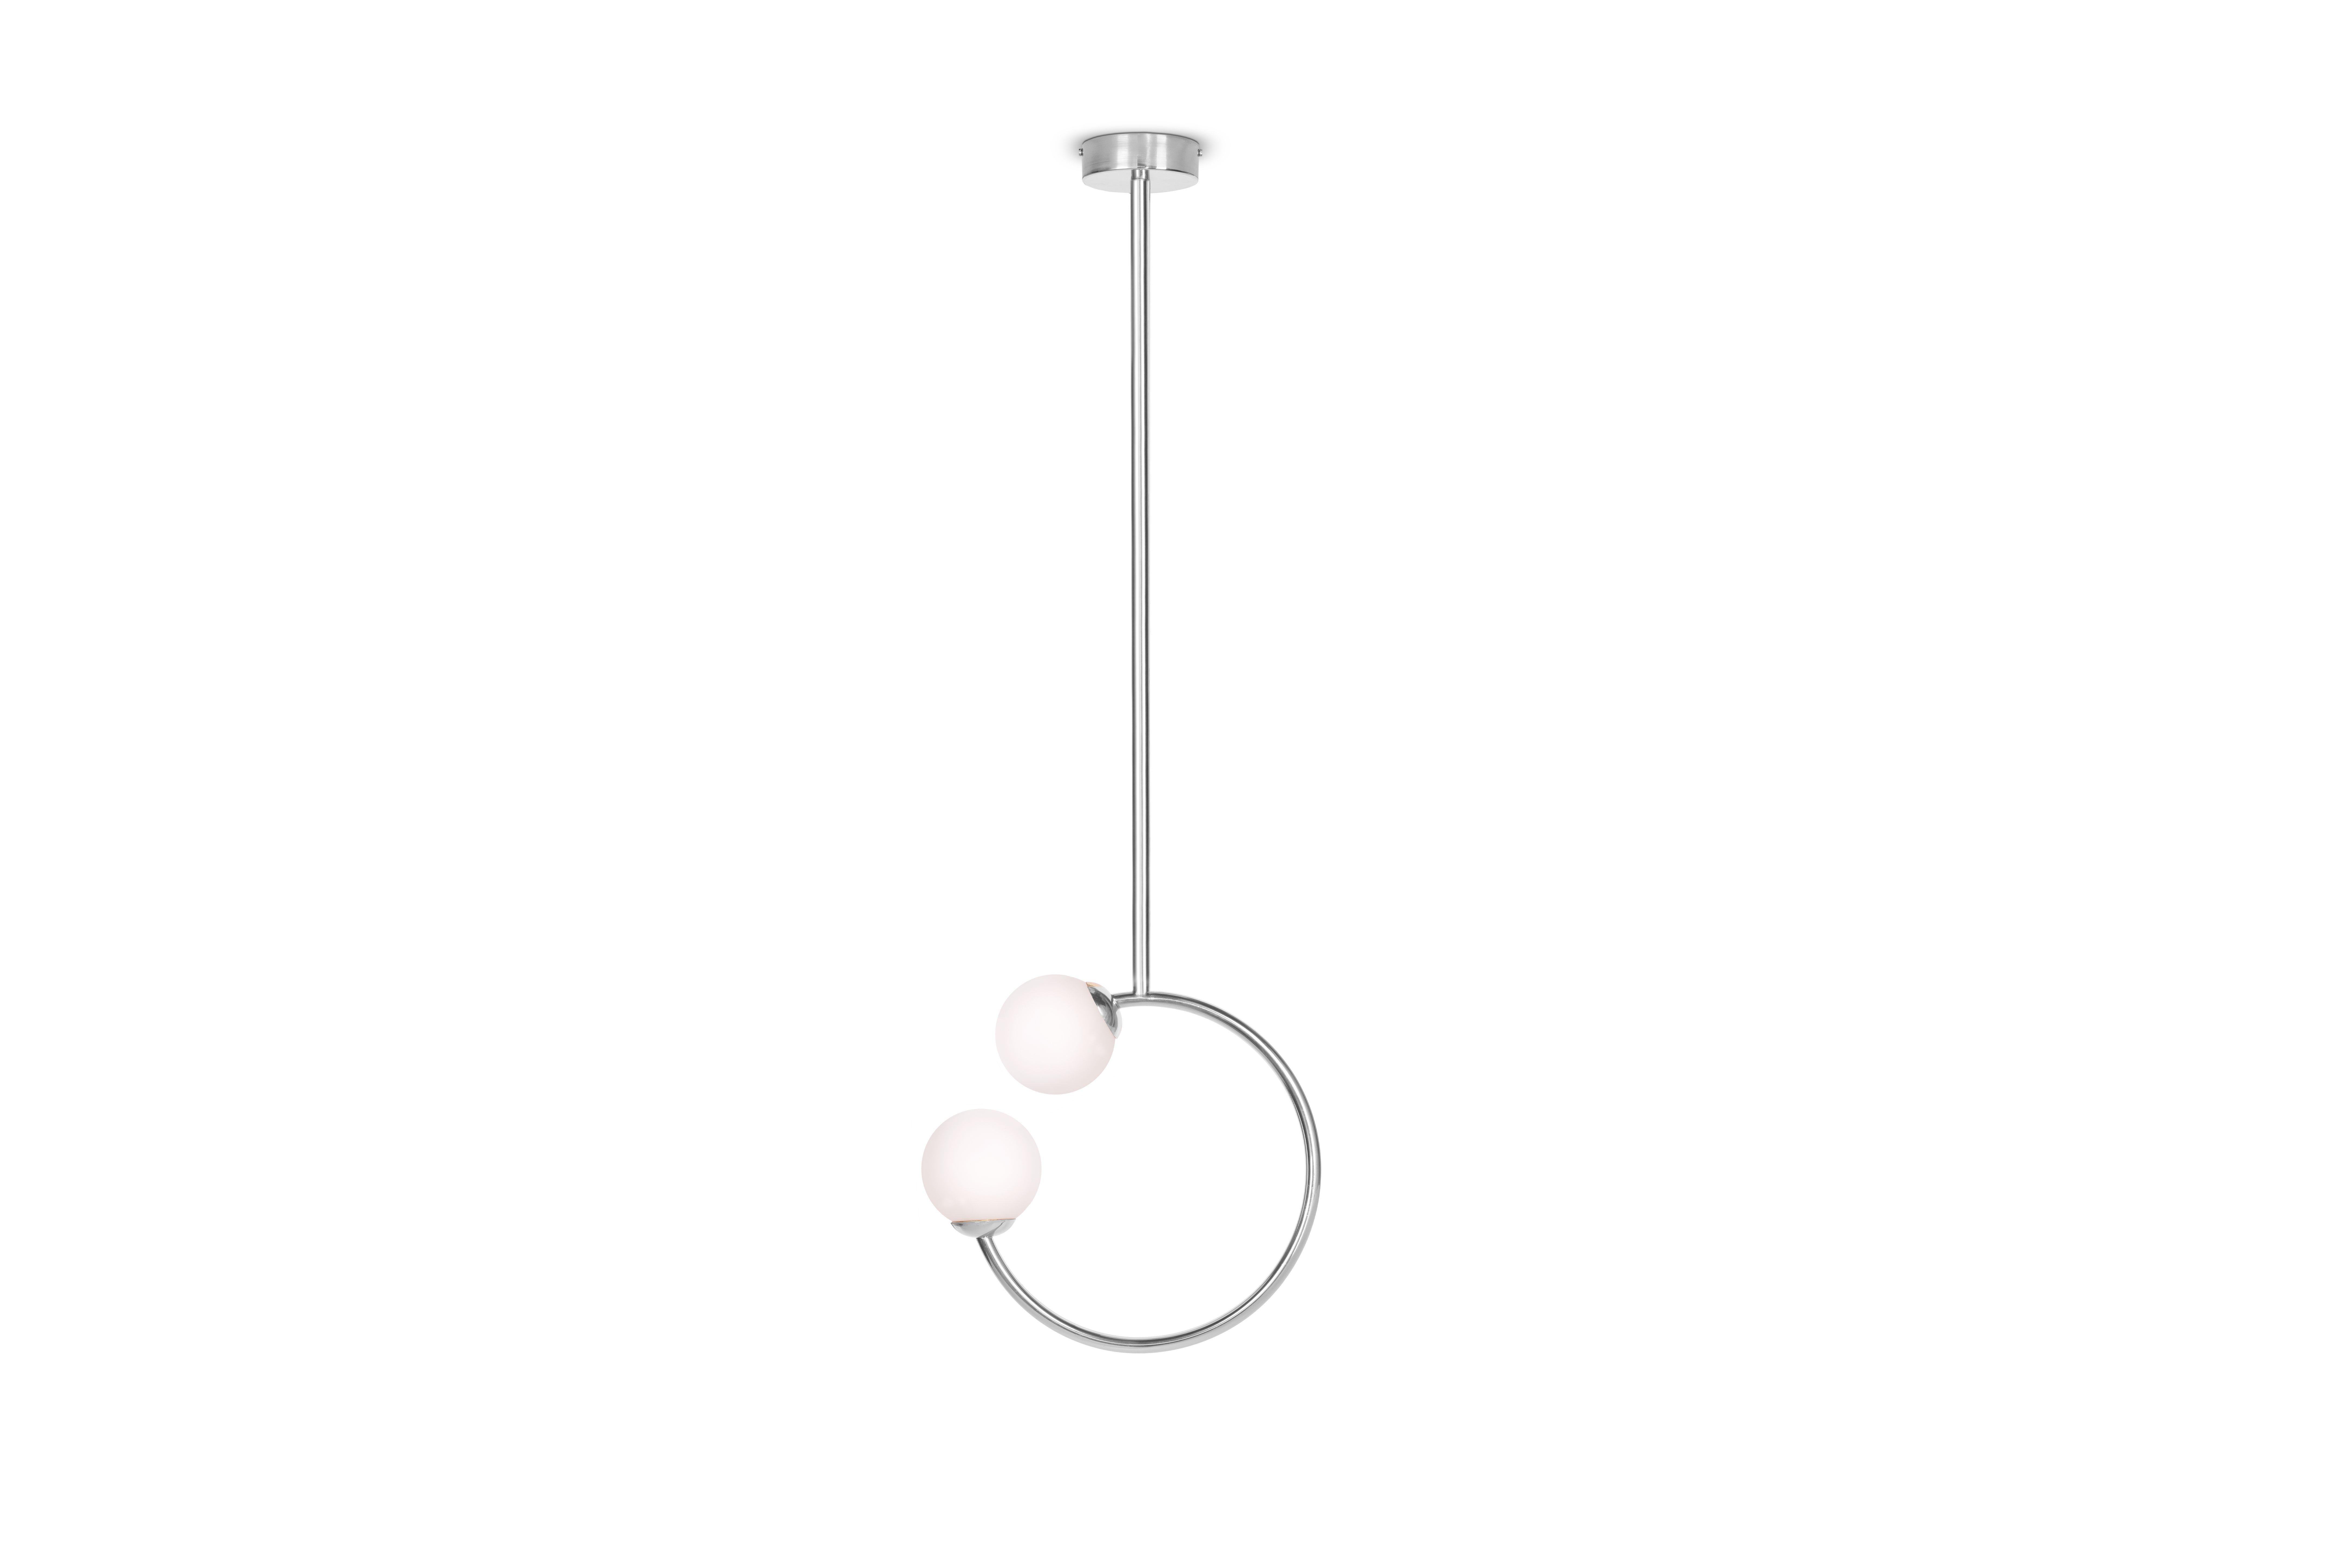 Gabriela stainless steel ceiling lamp, royal stranger
Dimensions: W 36 x D 14 x H 114 cm
Materials: Body Polished brass. Glass balls Blown glass opal diffuser.


Inspired by the femininity and using bold and vibrant color schemes, this